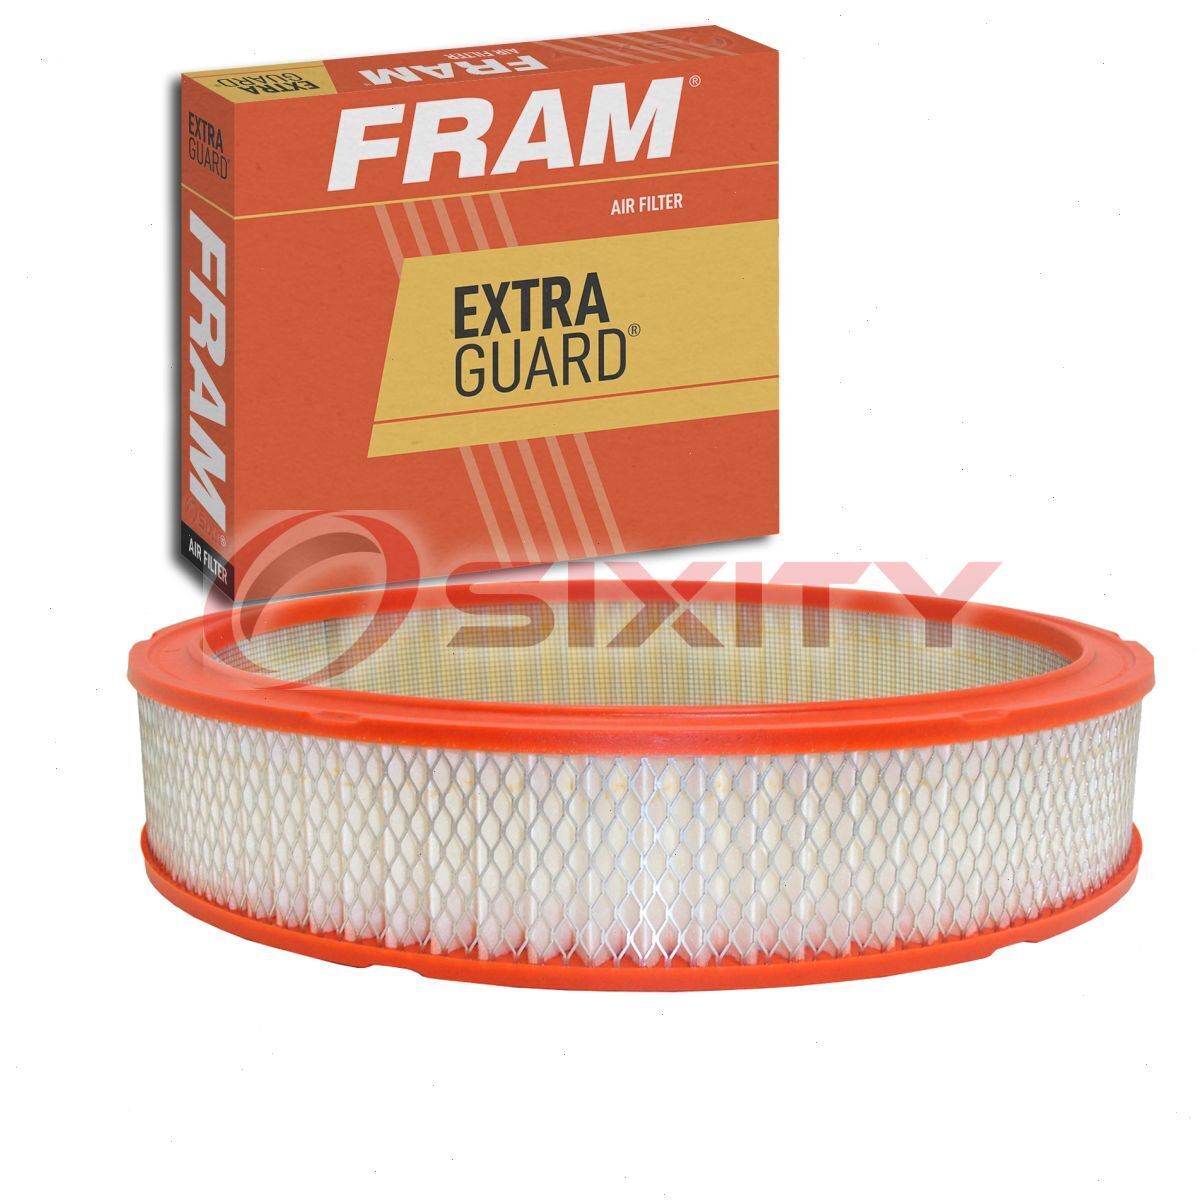 FRAM Extra Guard Air Filter for 1968-1976 Ford Torino Intake Inlet Manifold ht